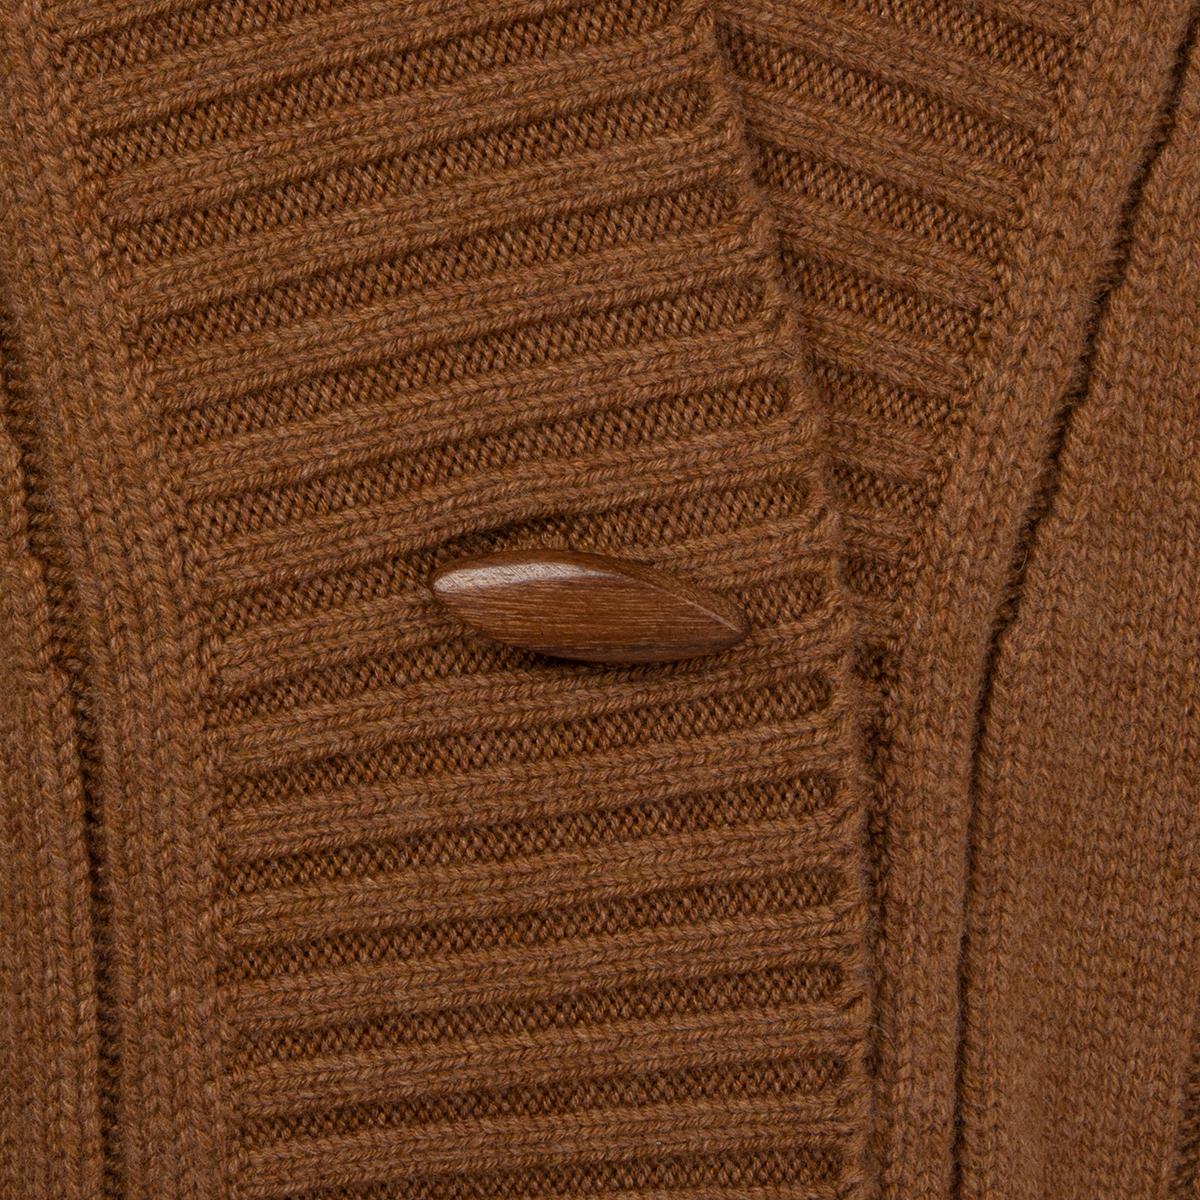 LORO PIANA  camel brown cashmere 2021 DUCA D'AOSTA OVERSIZED Cardigan Sweater XL In Excellent Condition For Sale In Zürich, CH